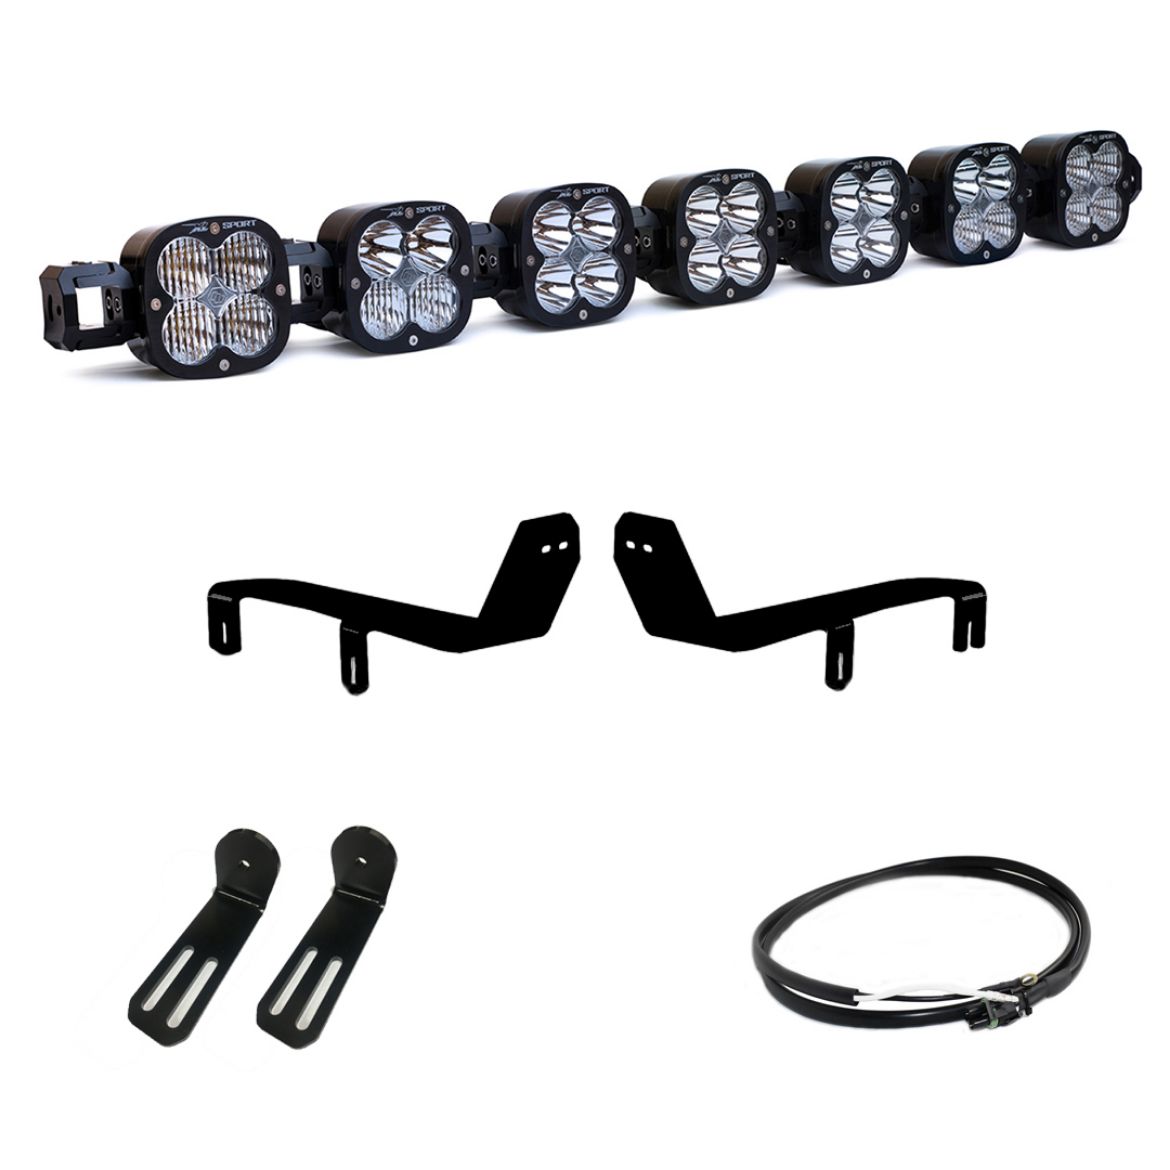 Picture of 7 XL Linkable LED Light Kit For 17-19 Ford Super Duty Baja Designs